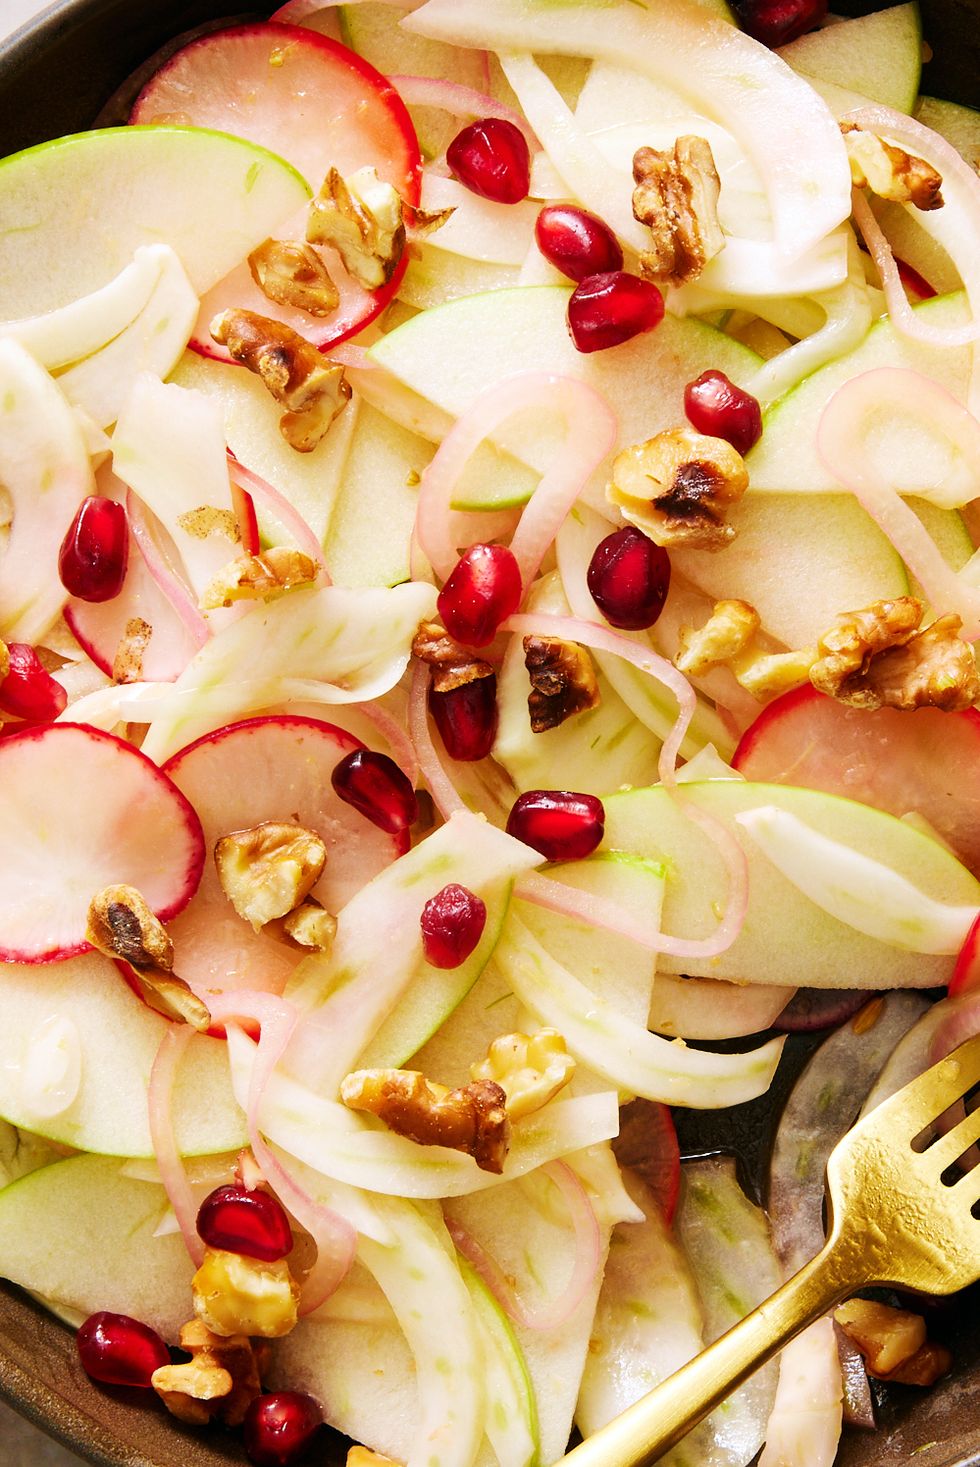 fennel salad with apples radishes